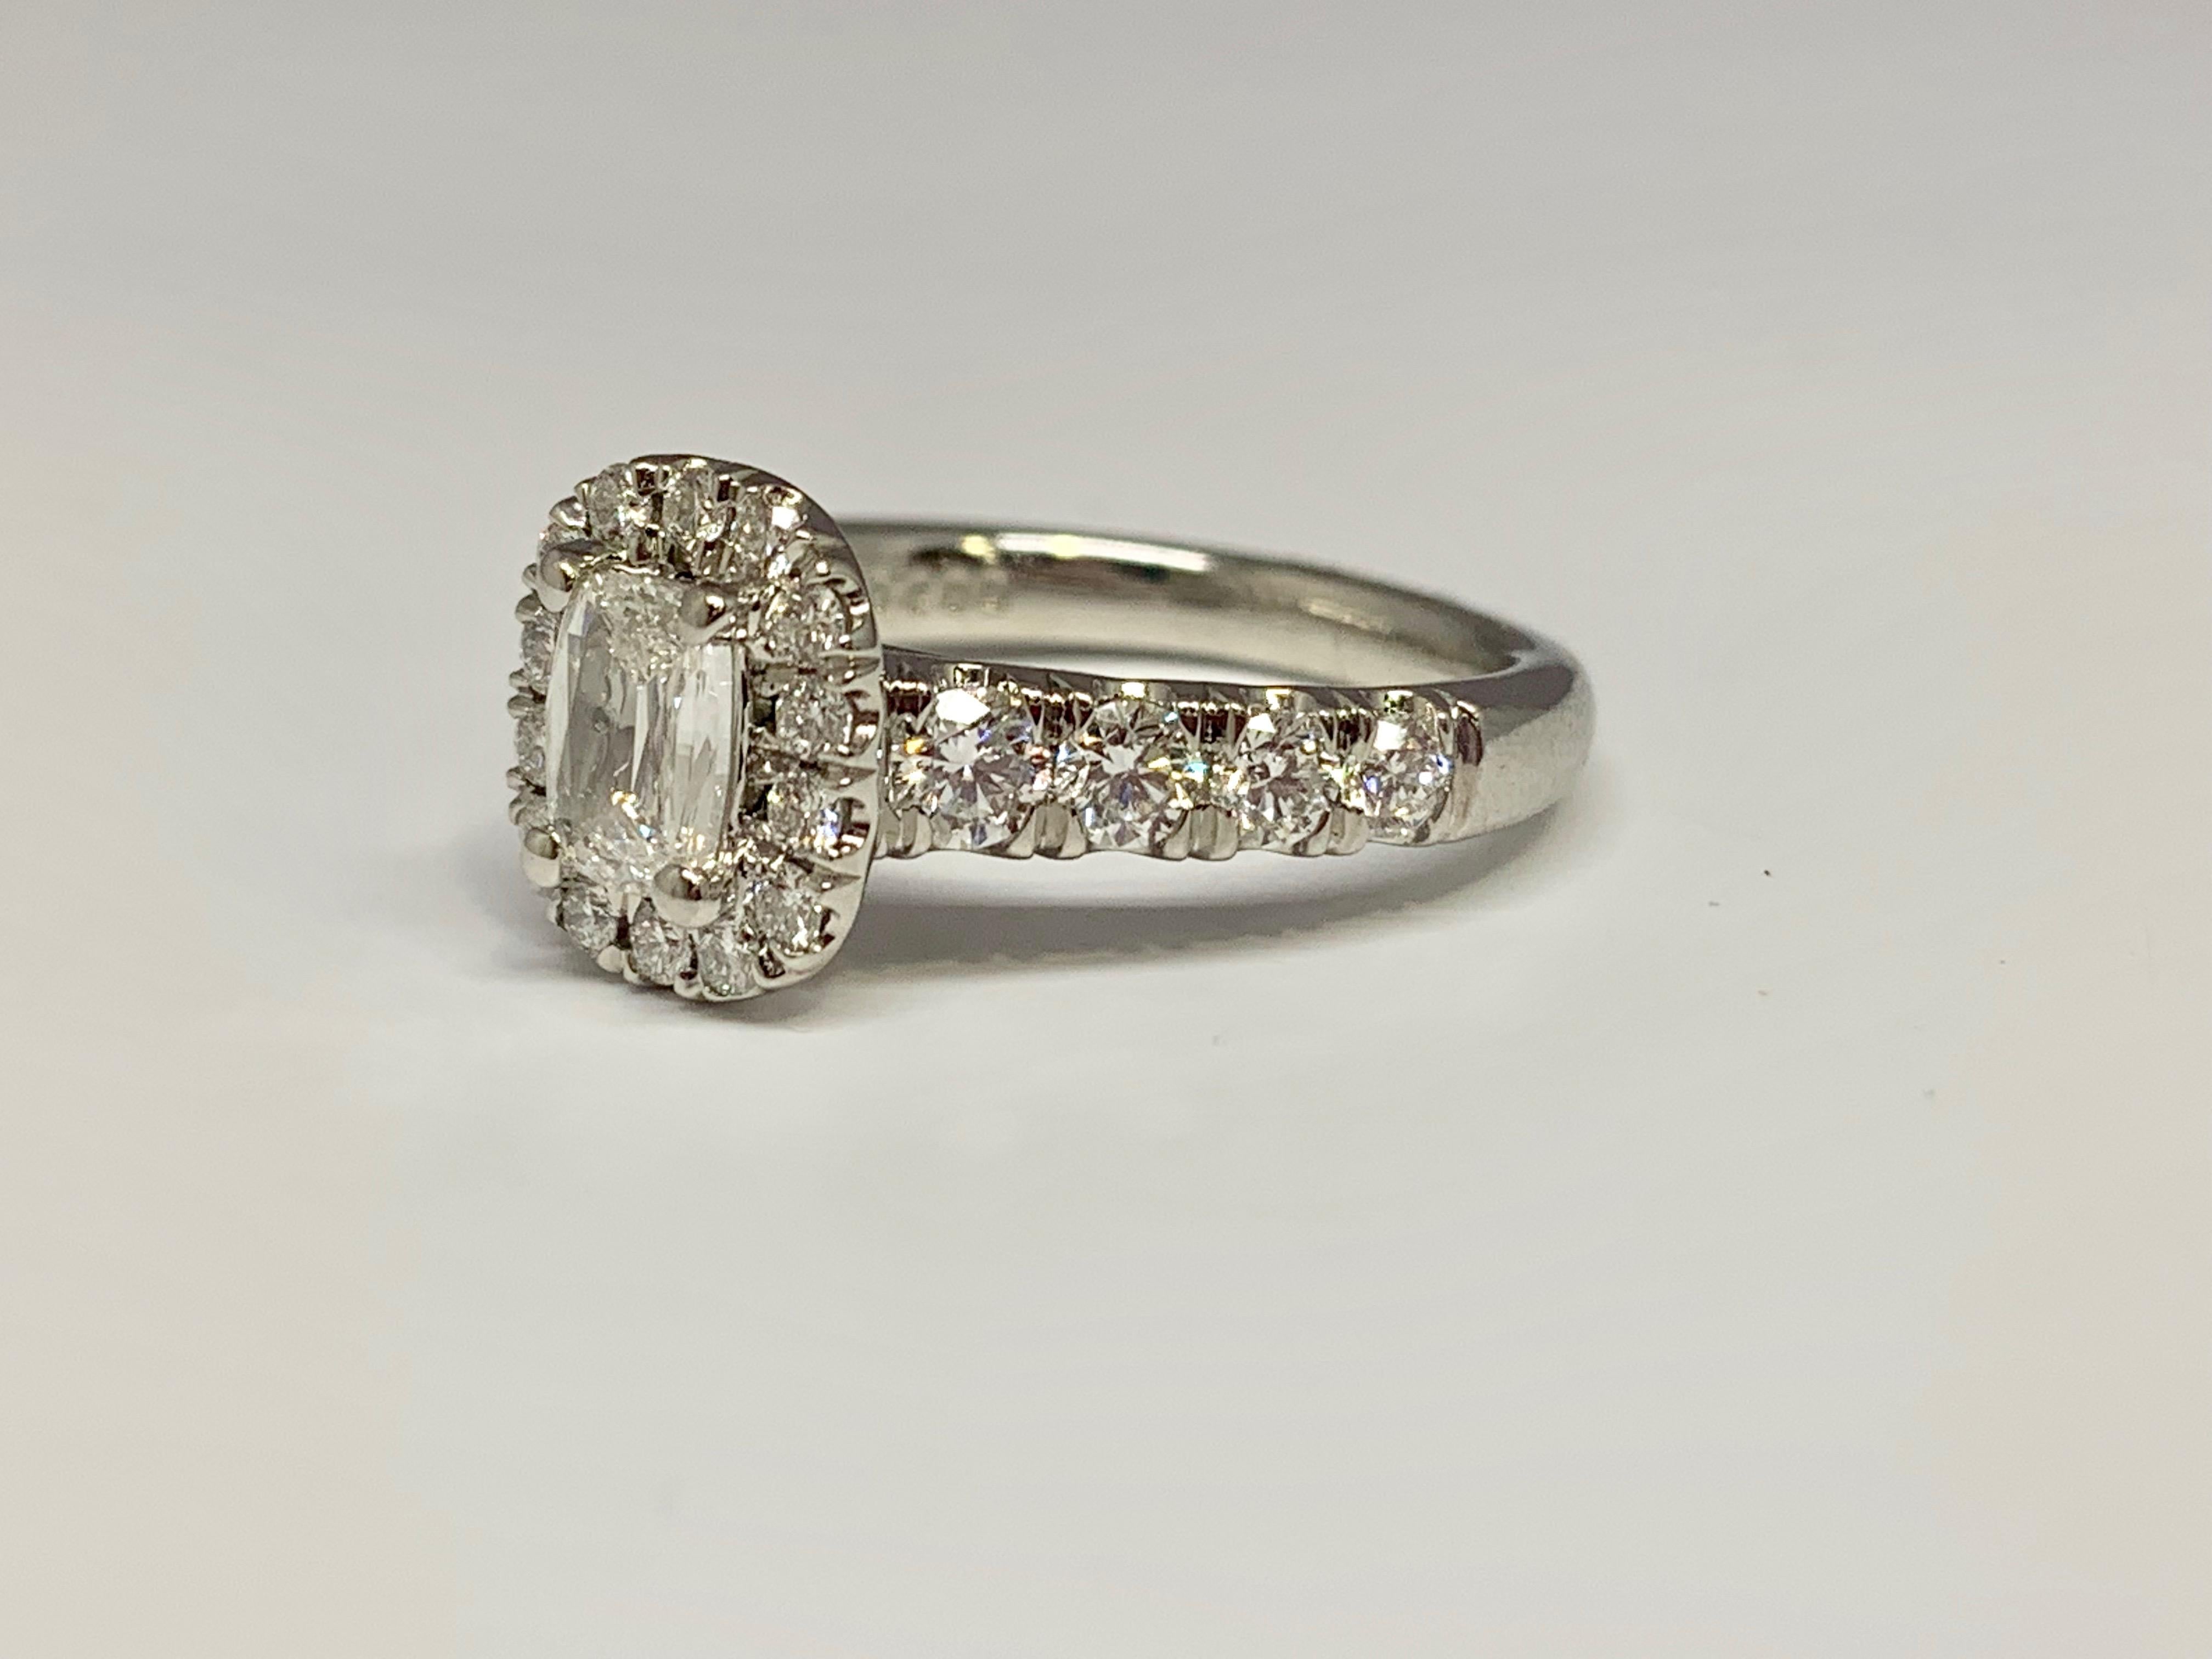 This beautiful Martin Flyer engagement ring features a GIA certified promise cut 0.47 carat center diamond. The center diamond has a color grade of E and a clarity grade of VS2. Its platinum mounting holds 0.98 carats of round diamonds on the band